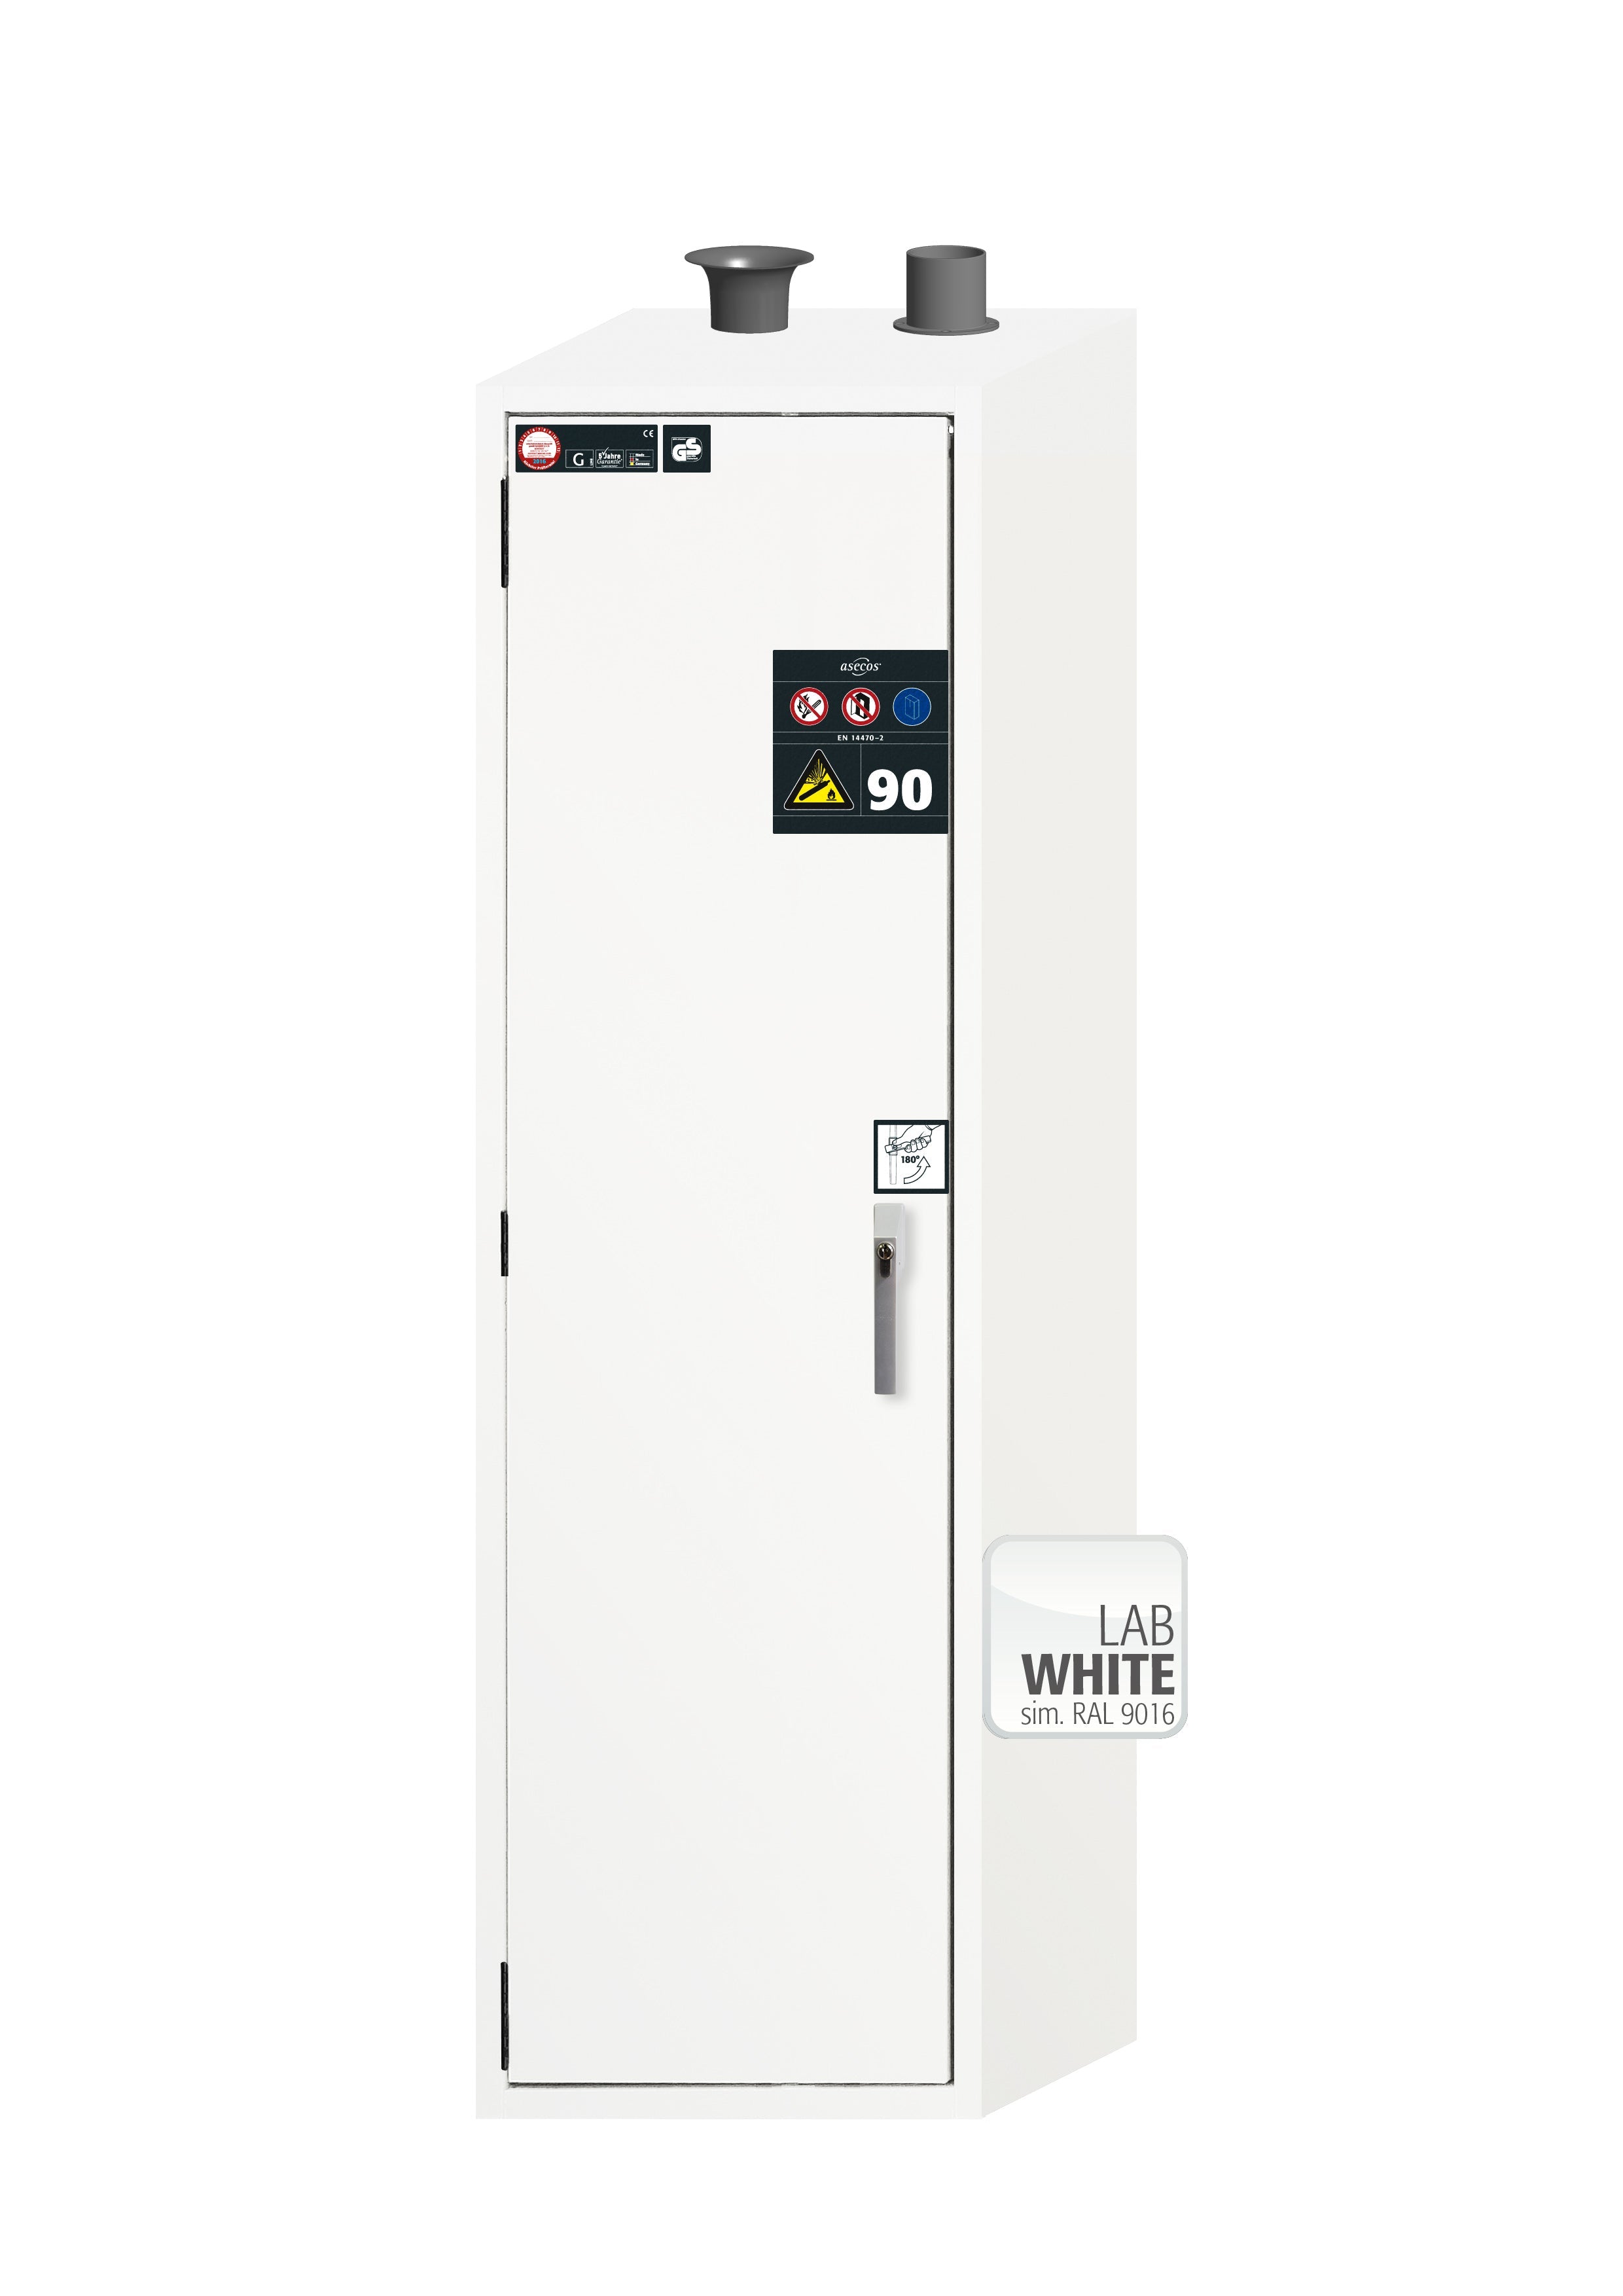 Type 90 compressed gas bottle cabinet G-ULTIMATE-90 model G90.205.060 in laboratory white (similar to RAL 9016) with for 1x compressed gas bottles of 50 liters each